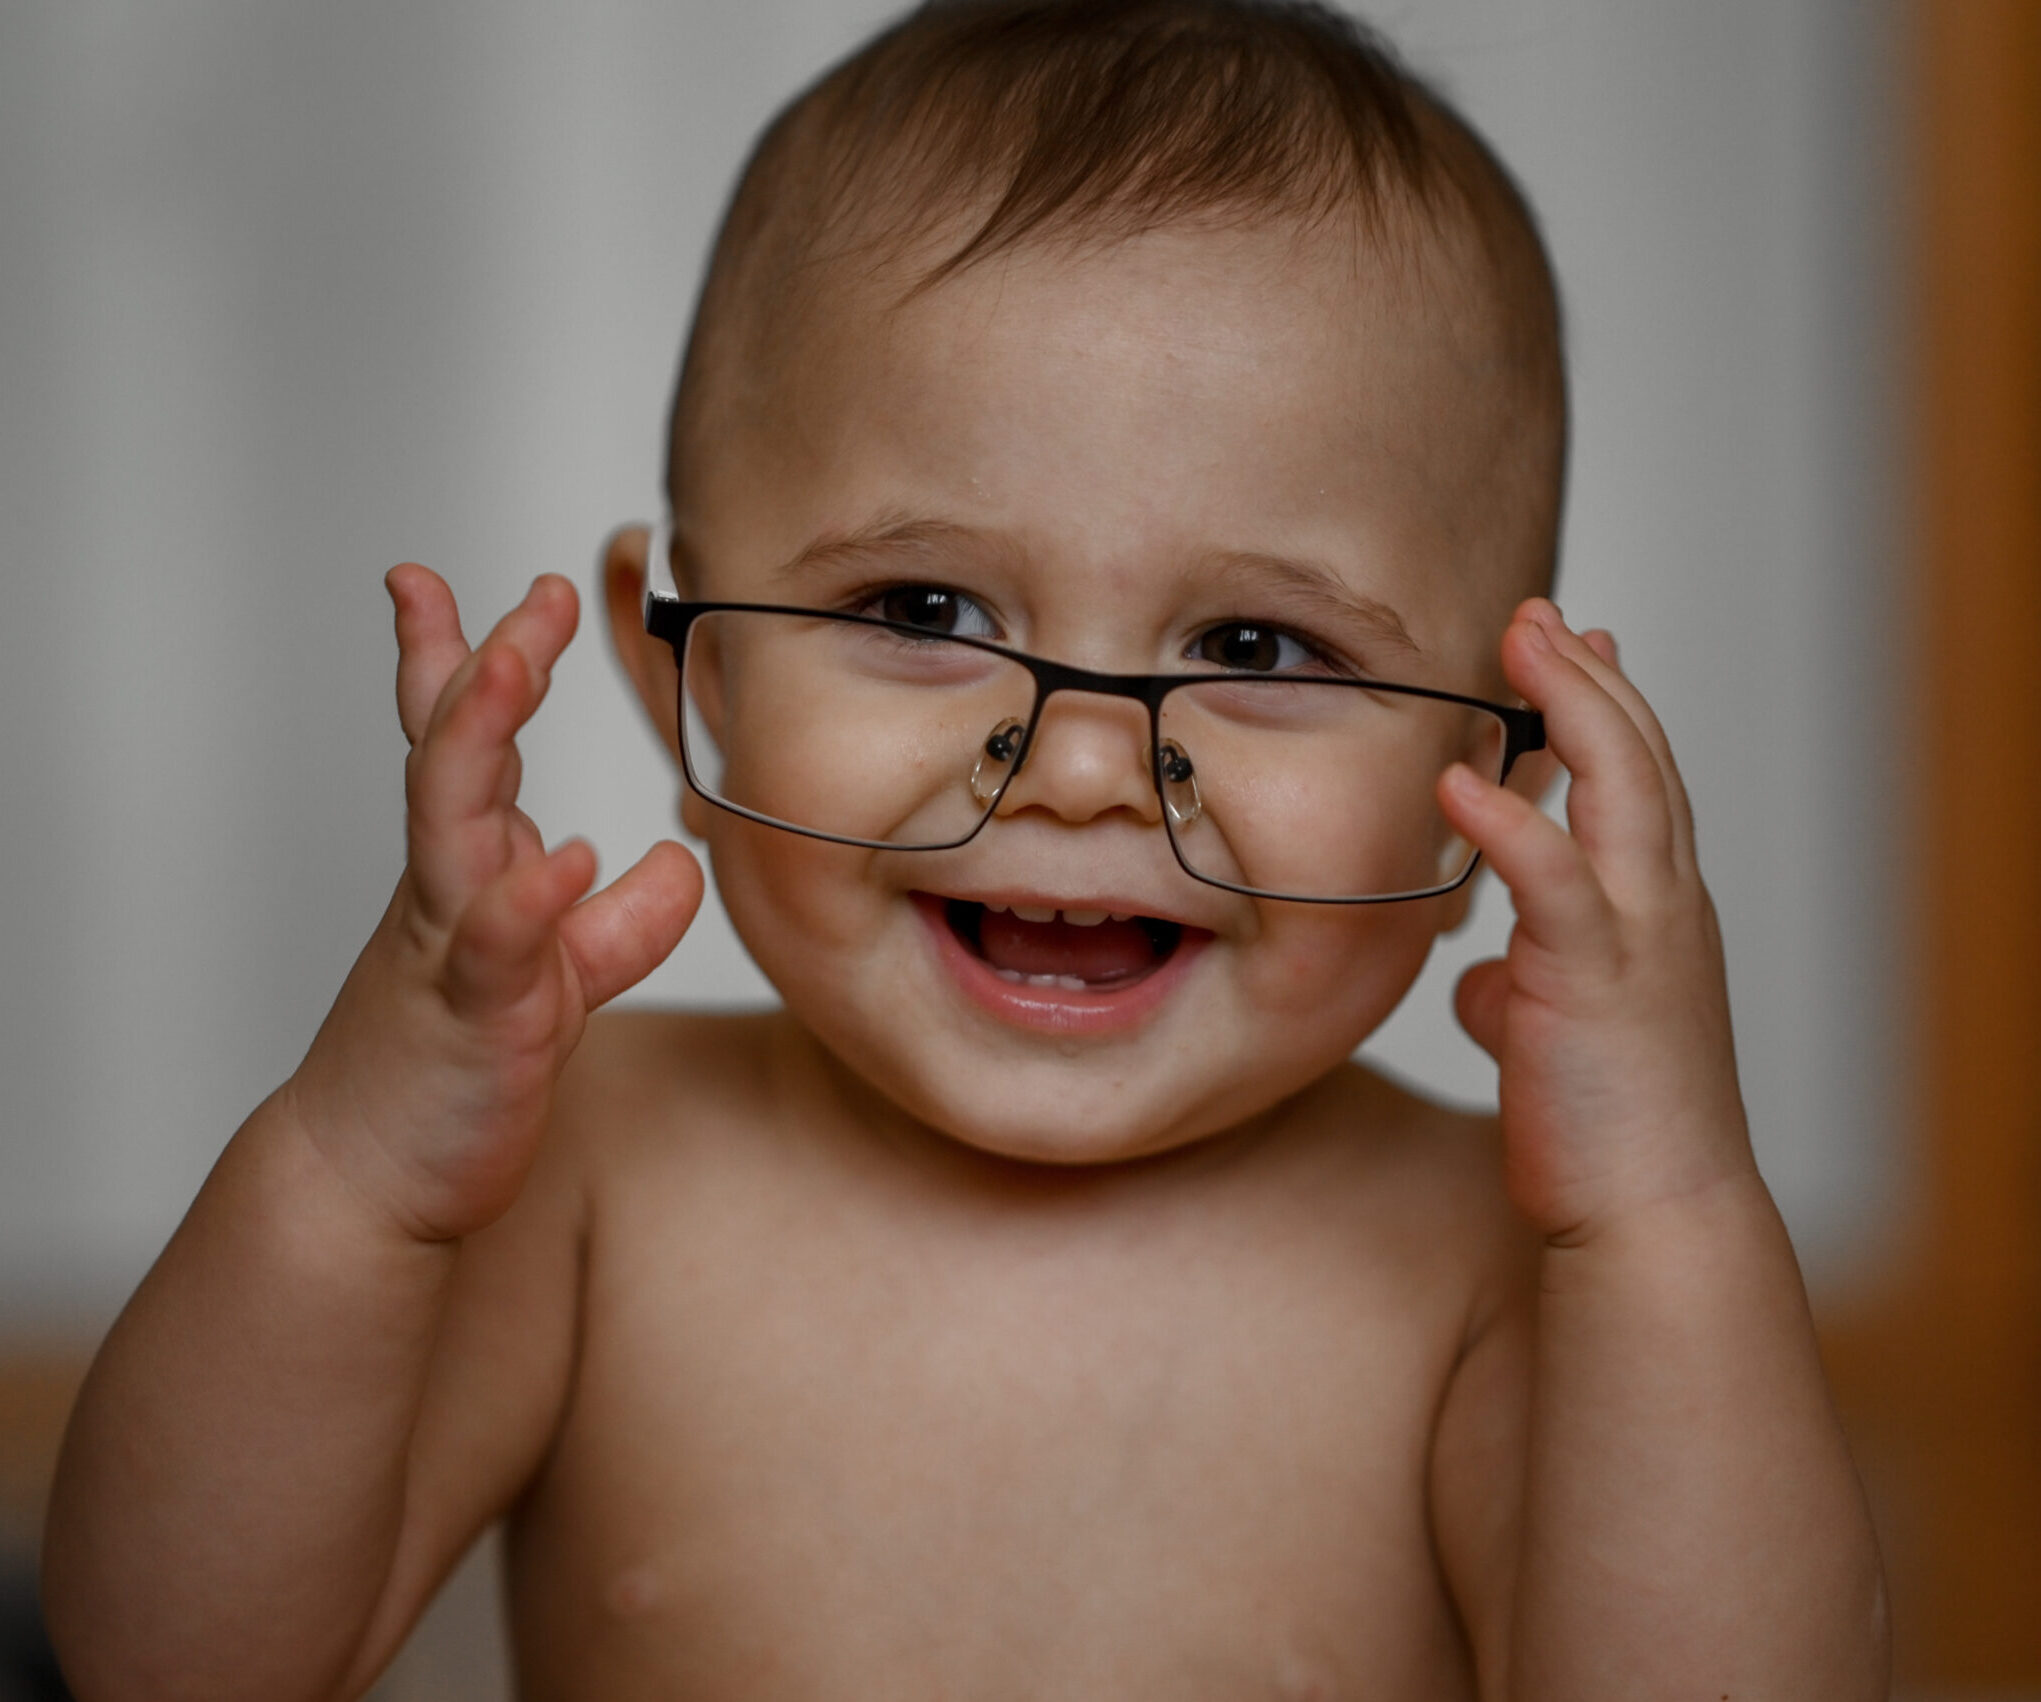 portrait-of-a-baby-with-glasses-the-child-tries-o-2022-03-01-21-18-32-utc